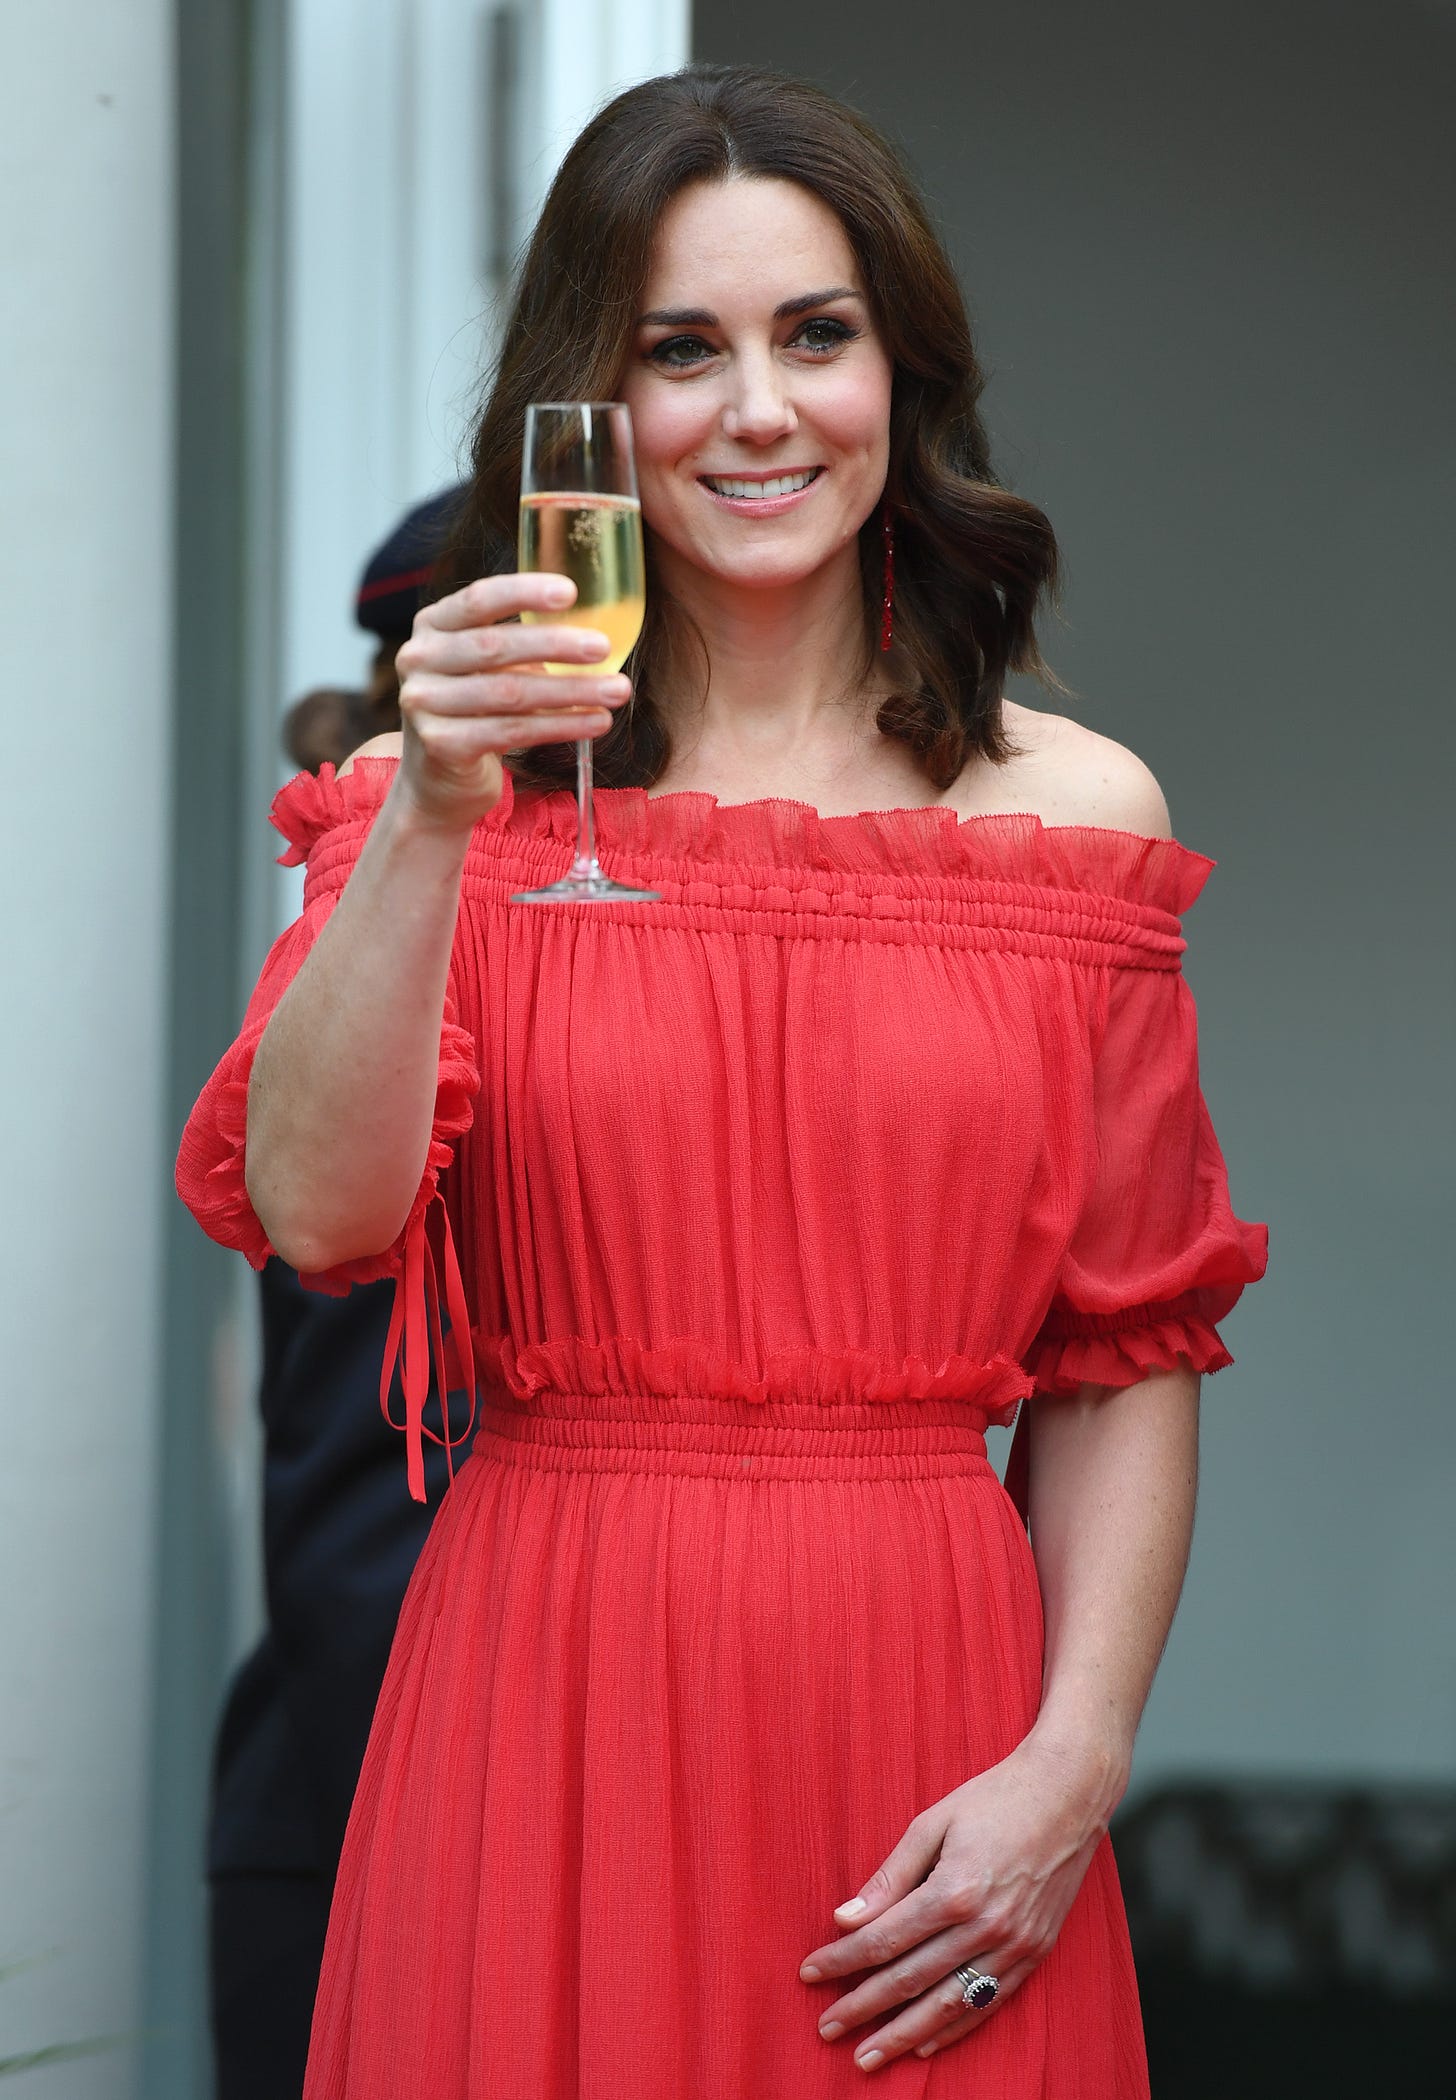 kate middleton holding glass of champagne